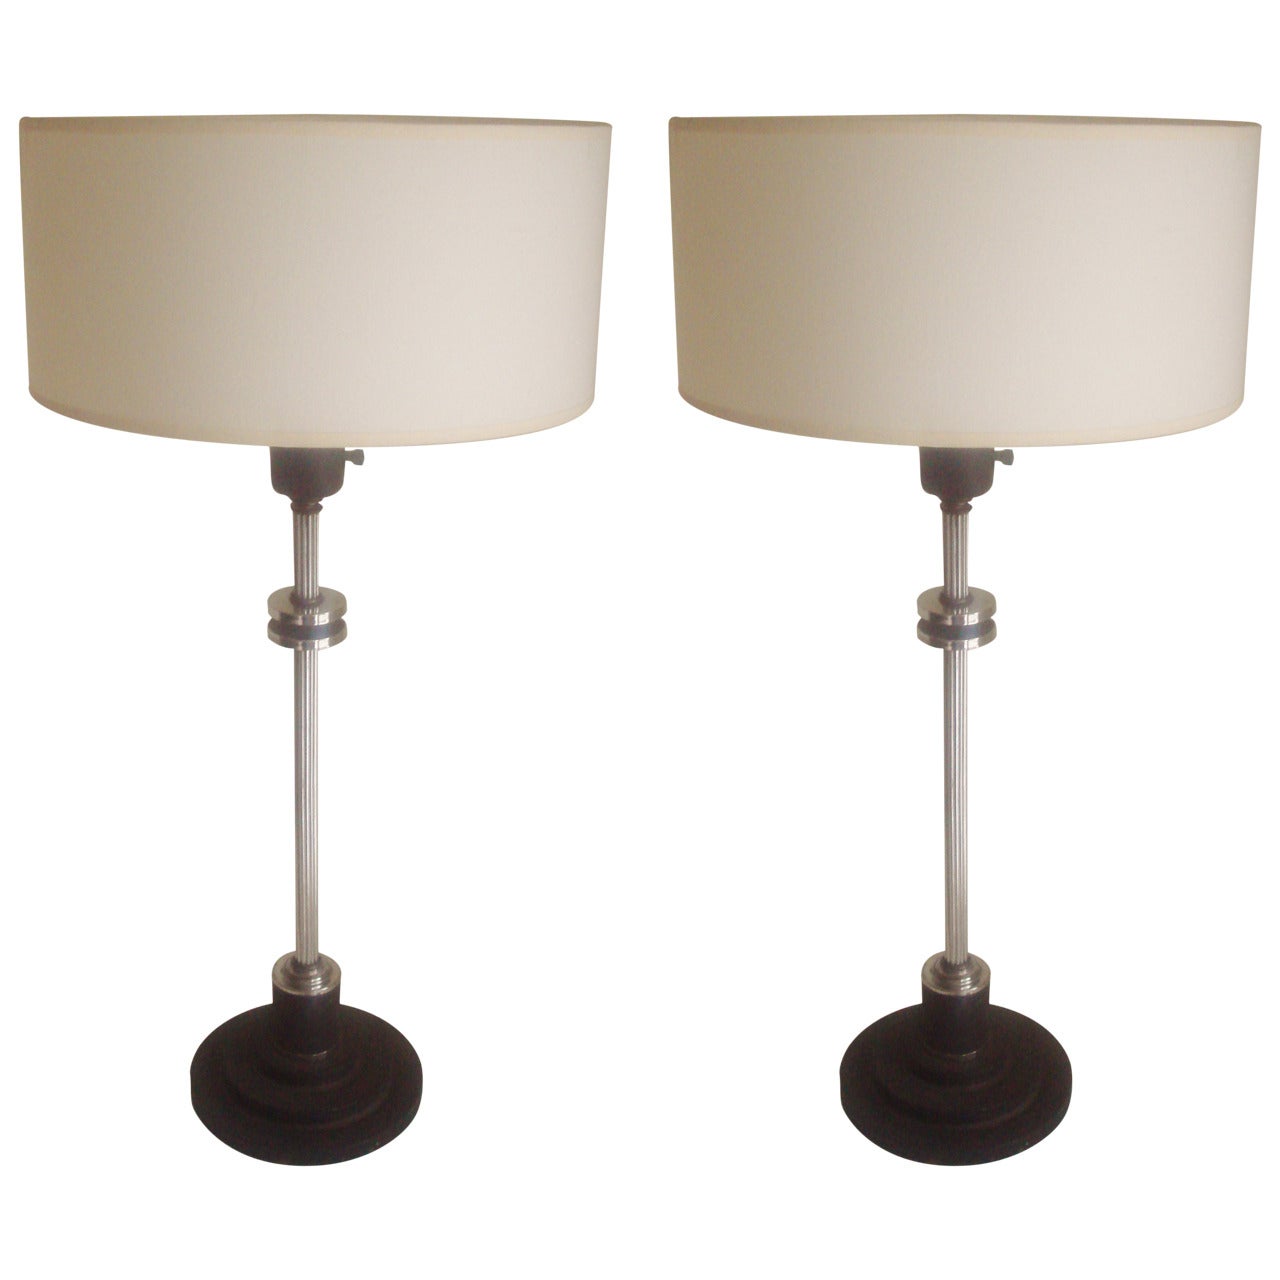 Pair of American Art Deco/Machine Age Tall Console Lamps. For Sale